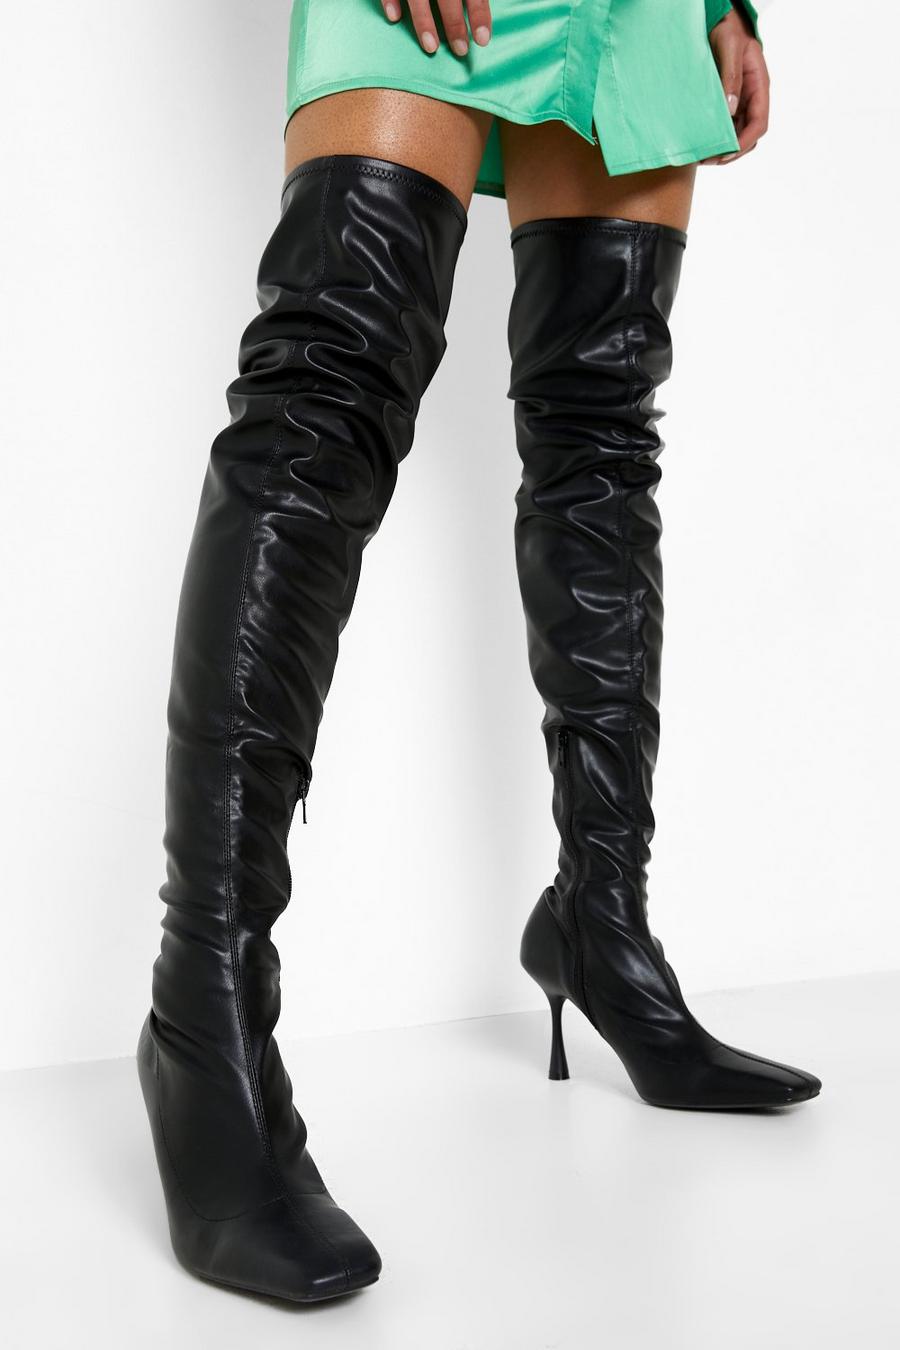 Black Over The Knee Boots Pointed Stiletto Boots